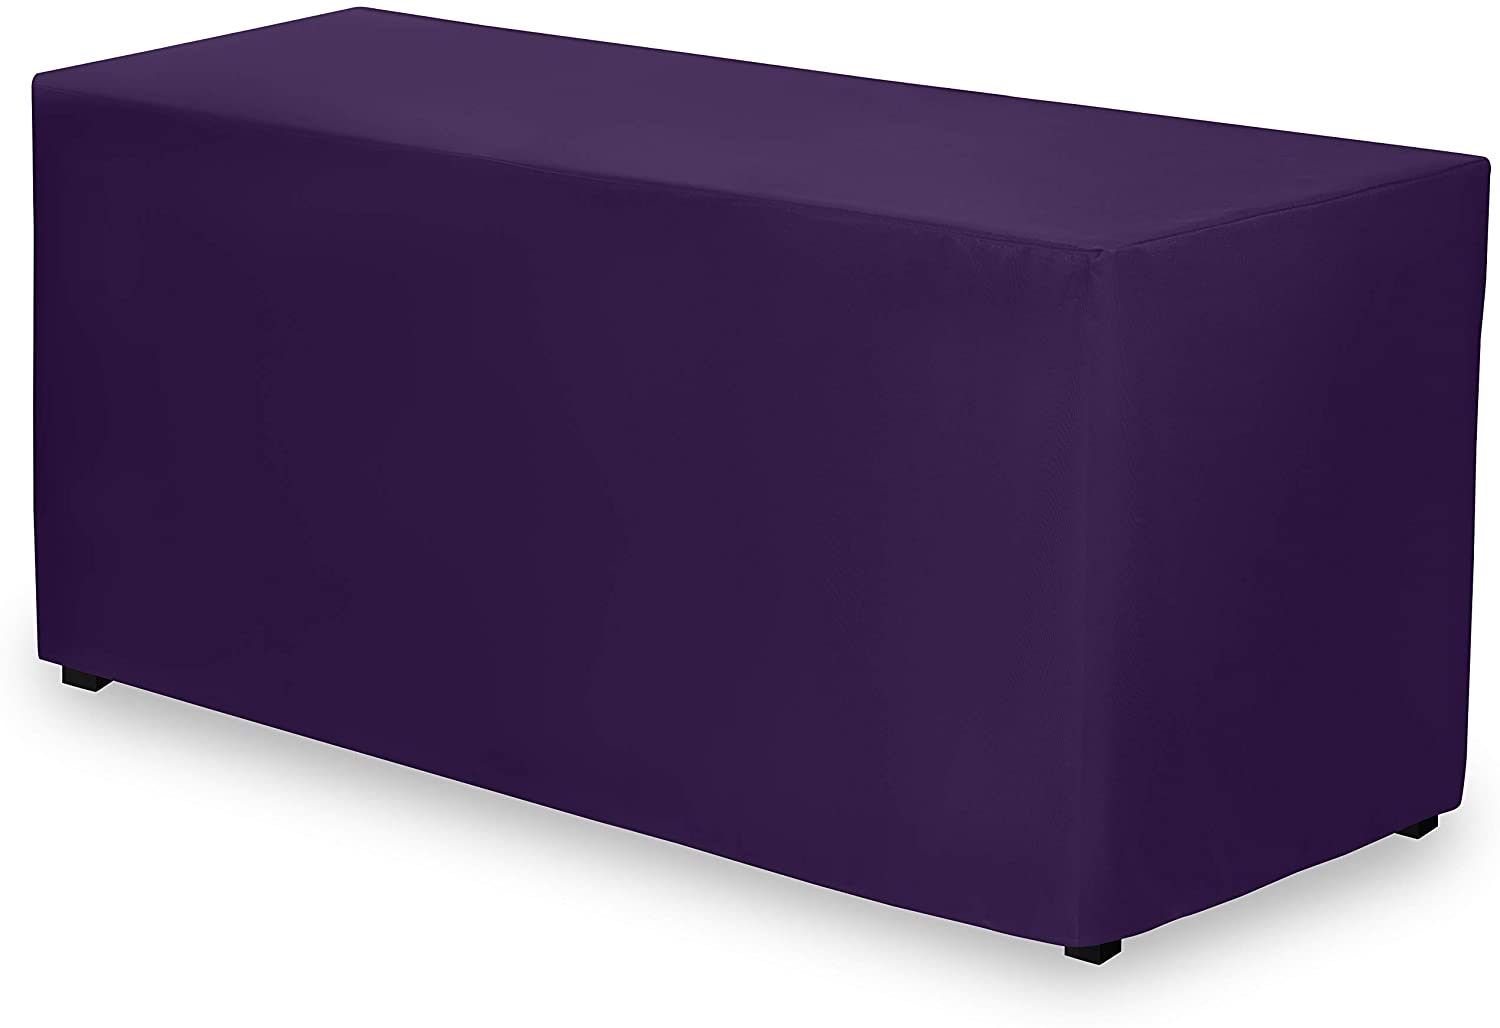 Purple fitted tablecloth, view from corner.